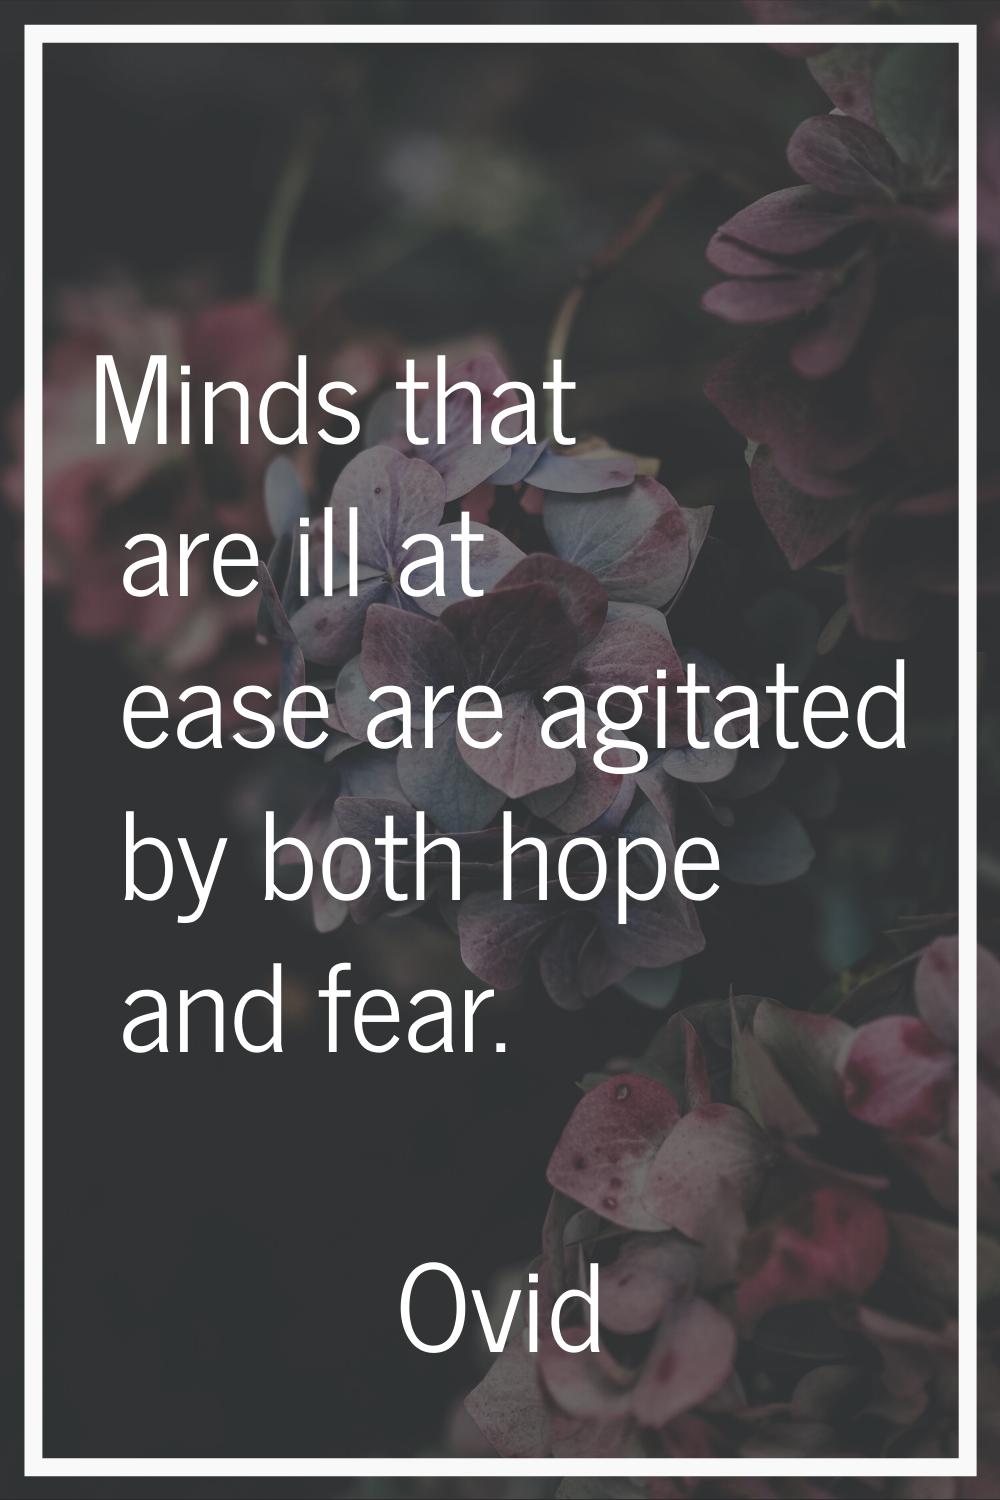 Minds that are ill at ease are agitated by both hope and fear.